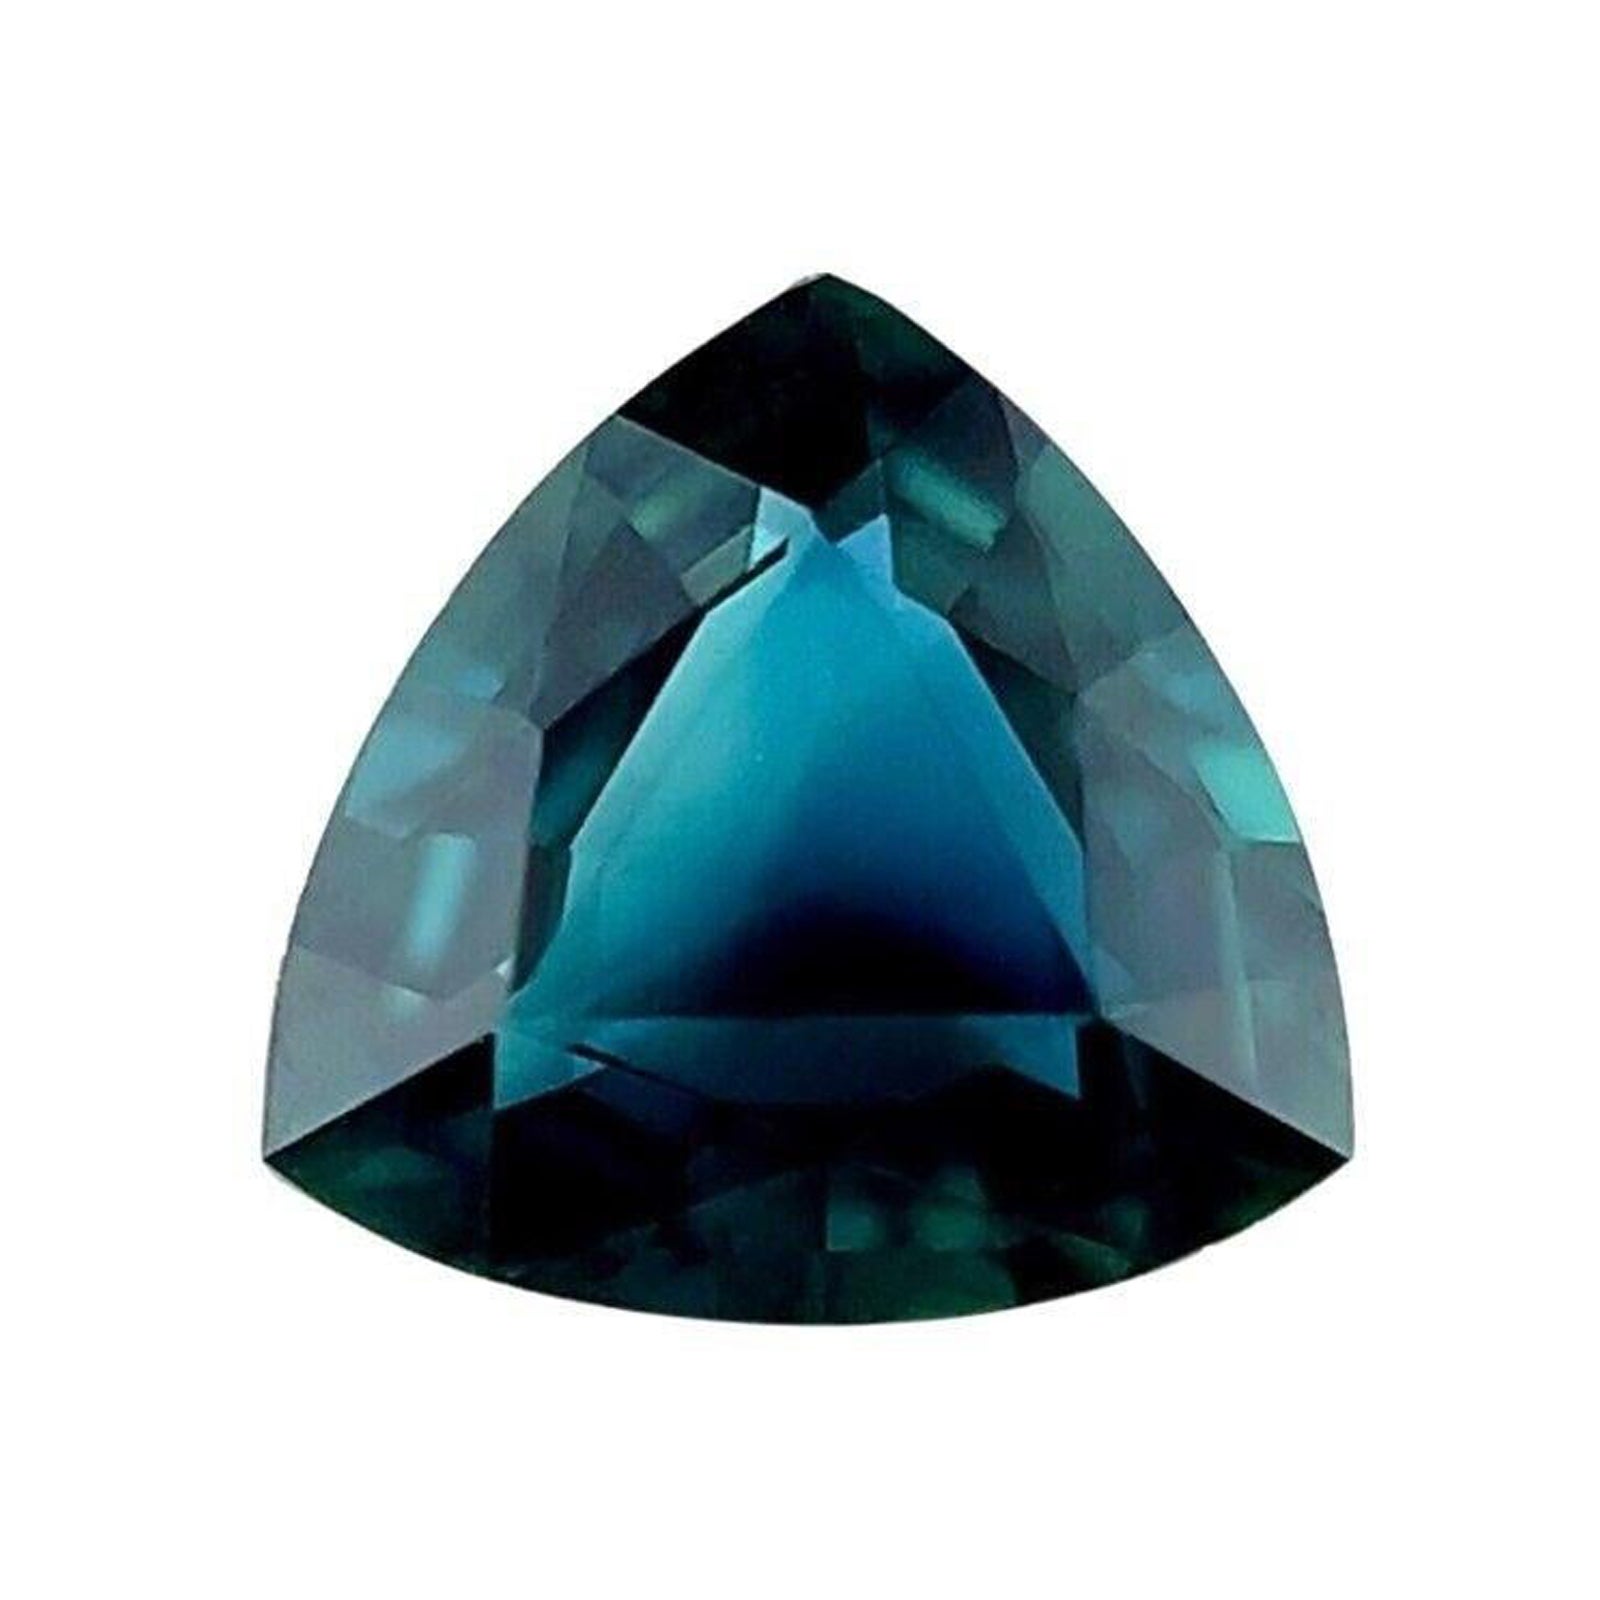 GIA Certified 1.15Ct Blue Sapphire Untreated Fine Natural Triangle Cut Gemstone For Sale